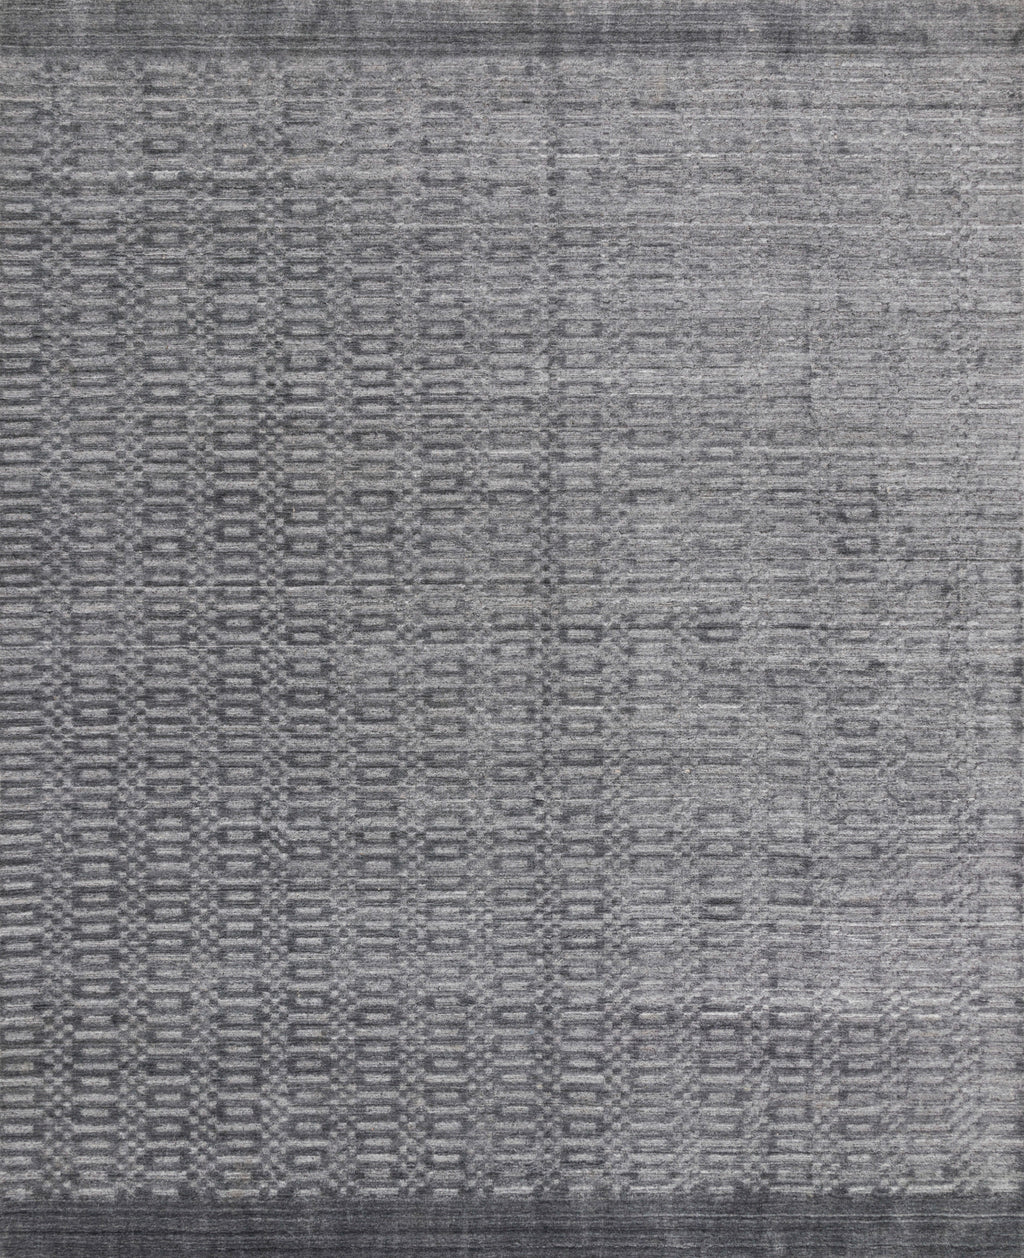 LENNON Collection Wool/Viscose Rug  in  STEEL Gray Accent Hand-Loomed Wool/Viscose